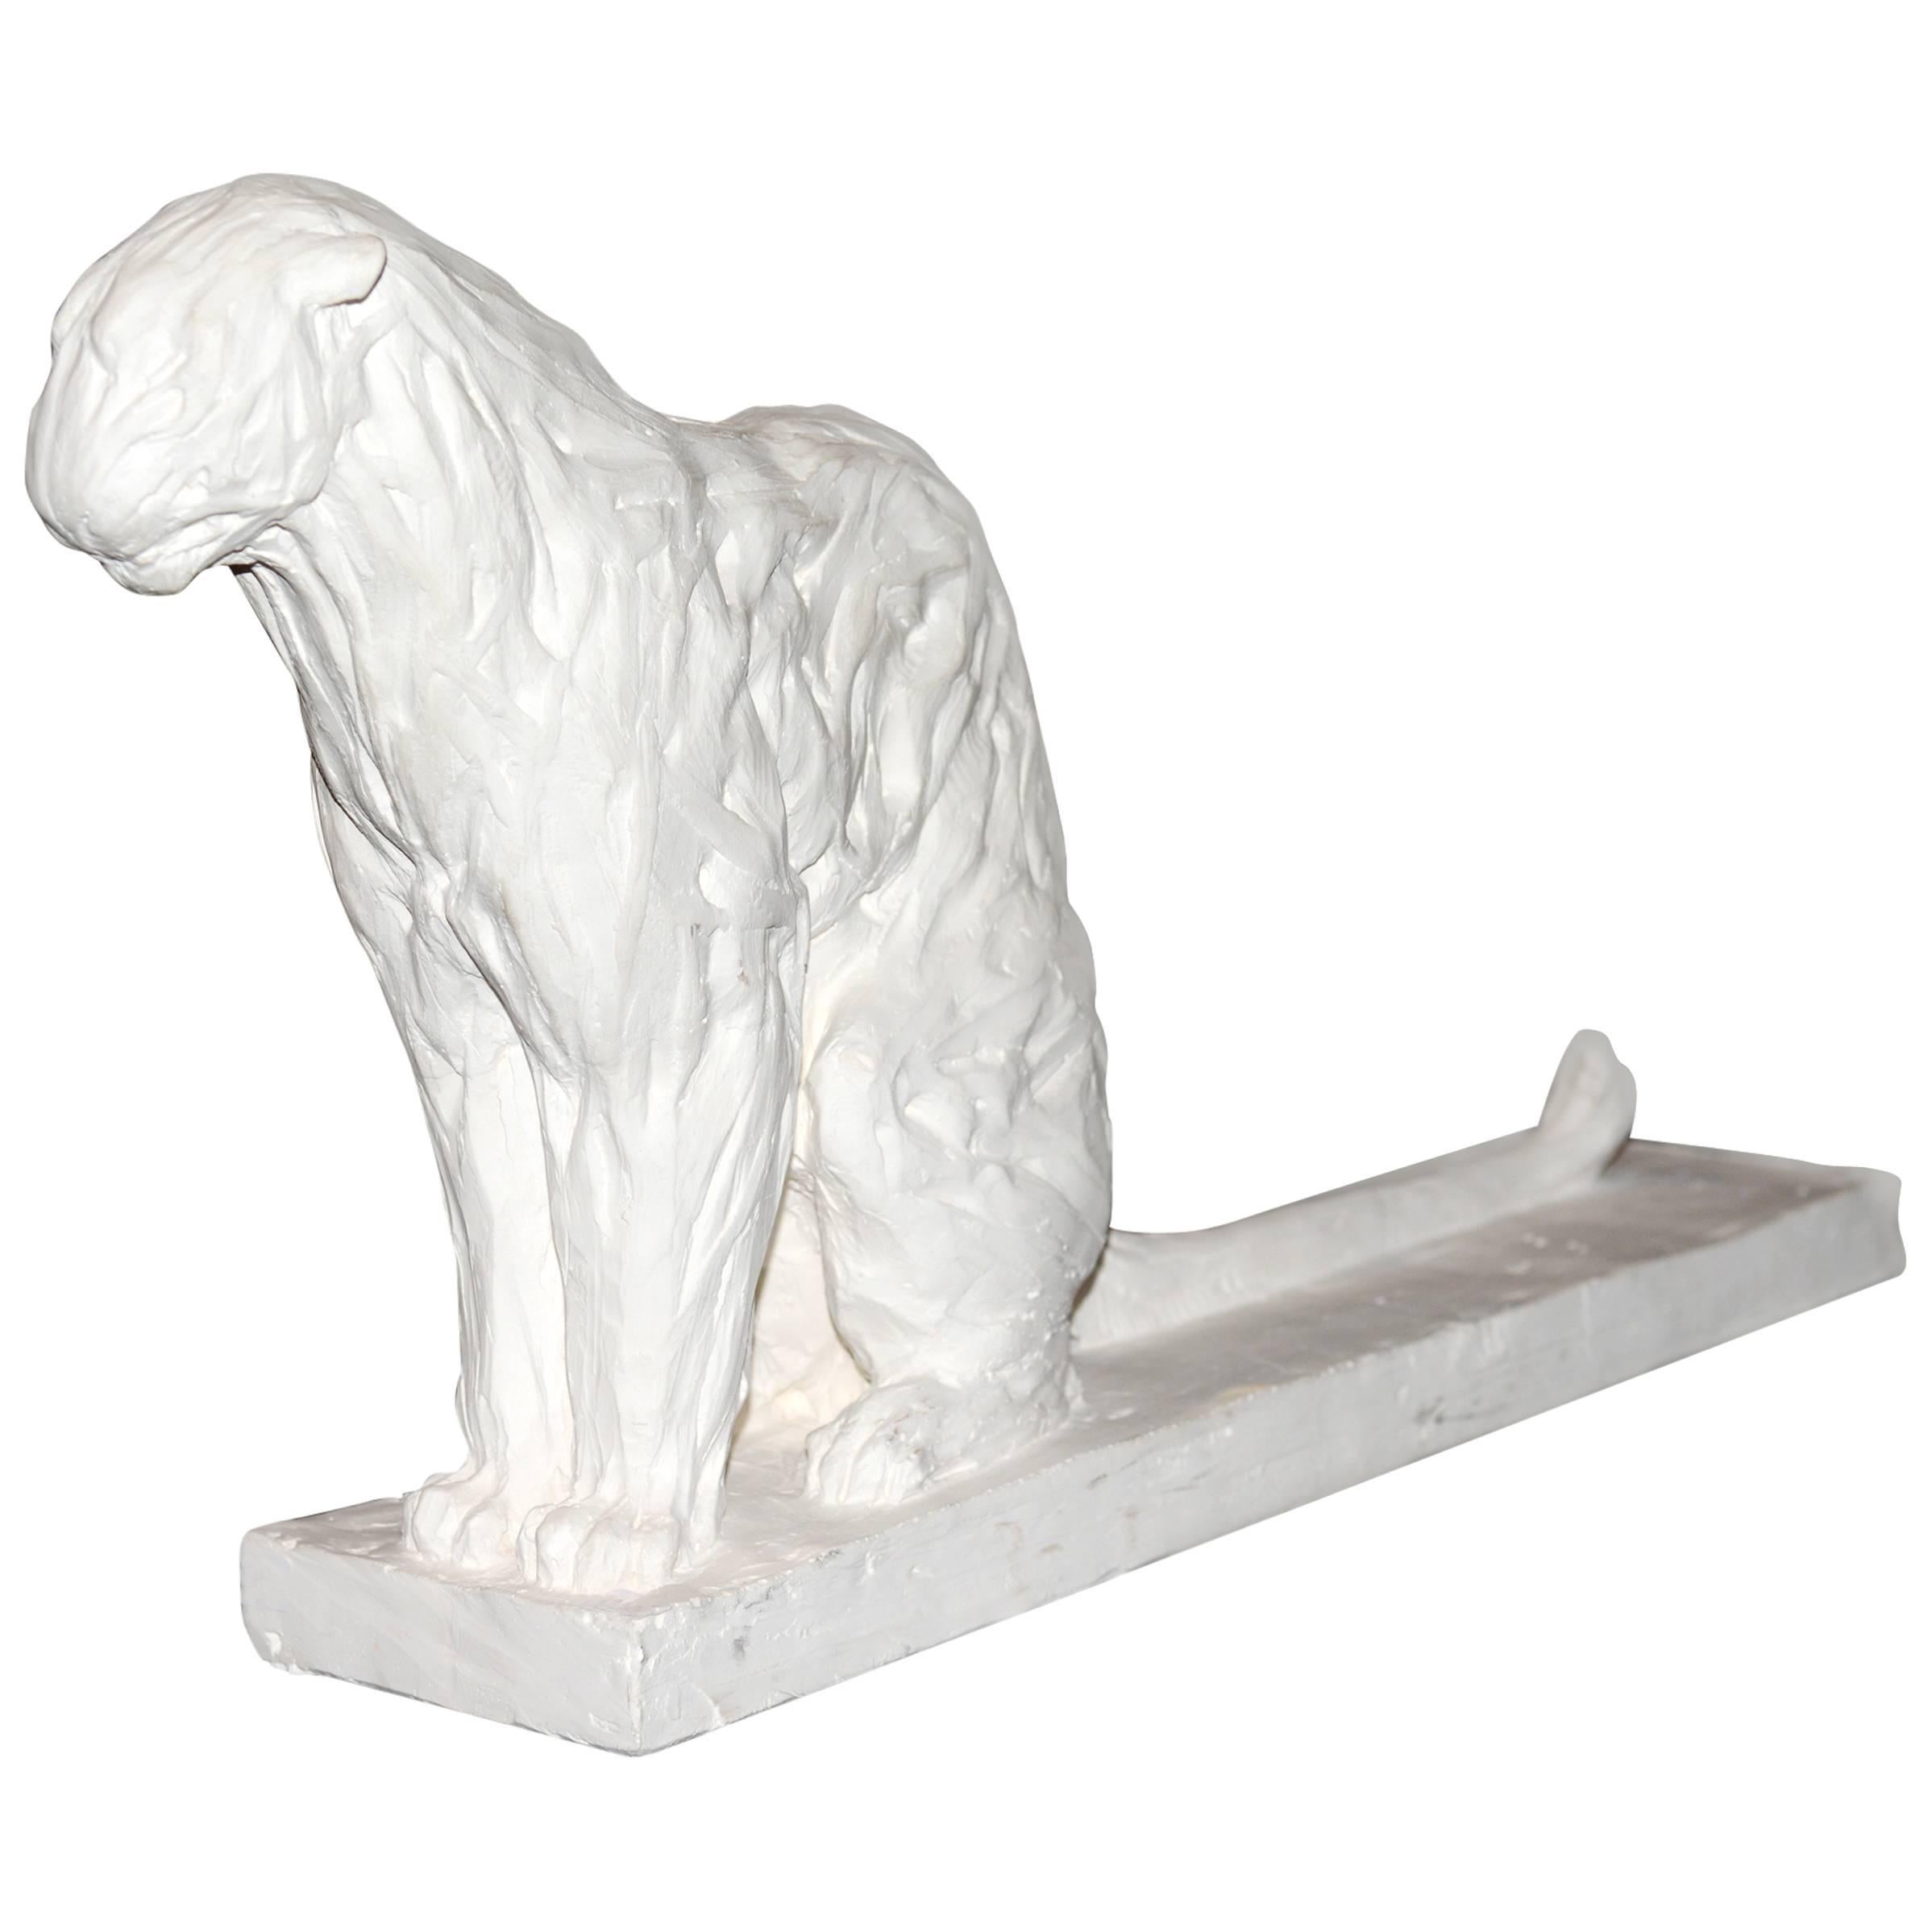 Sculpture Panther in Plaster Limited Edition 45/100 by J.B Vandame, 2015 For Sale